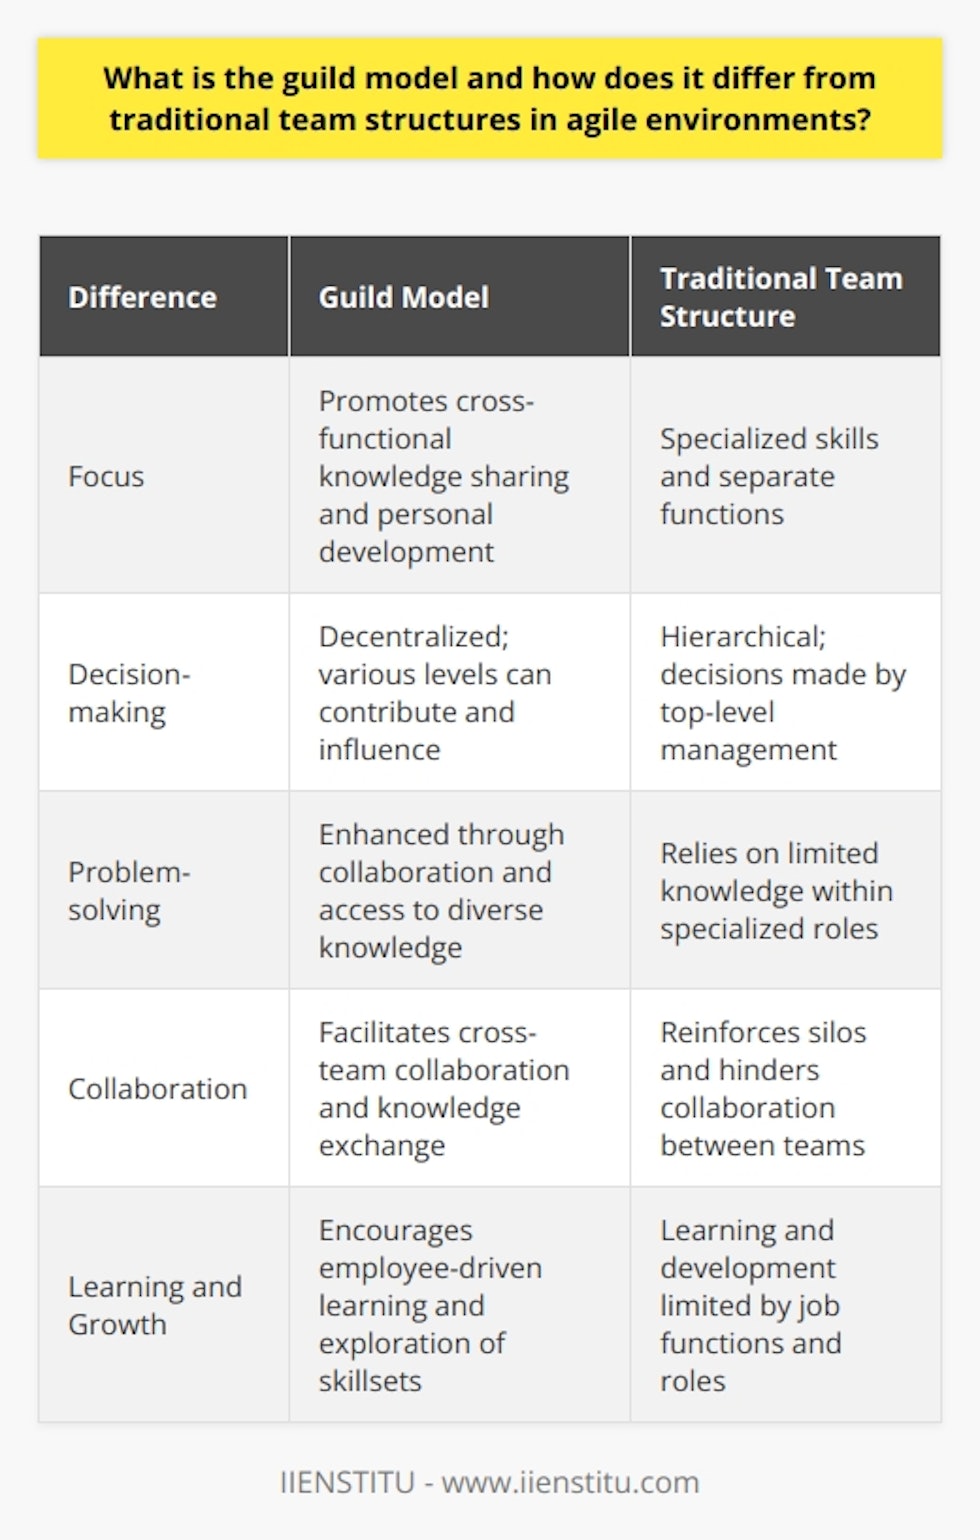 The guild model is a collaborative approach in agile environments that differs from traditional team structures by promoting cross-functional knowledge sharing and personal development. Guilds act as a supportive network for employees, fostering adaptive learning and strengthening weak areas.One key difference between the guild model and traditional team structures is the focus on expertise and skill development. Traditional teams often have specialized skills and separate functions, whereas guilds encourage continuous learning and cross-functional expertise by collaborating with colleagues who possess diverse skills and experiences.Another difference is the decentralized decision-making process. Unlike traditional hierarchies, guilds allow individuals at various levels in the organization to contribute and influence decisions. This flexibility and adaptability enable teams to address problems efficiently and meet the changing needs of the project or organization.The guild model also enhances problem-solving capabilities by encouraging employees to seek insights from a wider pool of knowledge and experience. This shared understanding enables teams to achieve comprehensive solutions to complex problems, enhancing agility and adaptability in the workplace.In contrast to traditional team structures that reinforce silos and hinder collaboration between teams, guilds facilitate cross-team collaboration. Members from different teams come together, communicate openly, and exchange insights, experiences, and best practices, fostering a culture of innovation.Furthermore, the guild model promotes employee-driven learning and growth. In traditional team structures, learning and development opportunities are often limited by job functions and roles. With guilds, employees are empowered to explore skillsets, learn from their peers, and pursue their interests, resulting in a more motivated and self-driven workforce.Overall, the guild model provides an alternative to traditional team structures in agile environments. It offers advantages such as cross-functional collaboration, decentralized decision-making, and employee-driven learning. This innovative approach encourages a culture of continuous improvement and agility, enabling organizations to remain competitive and adapt to dynamic market conditions.